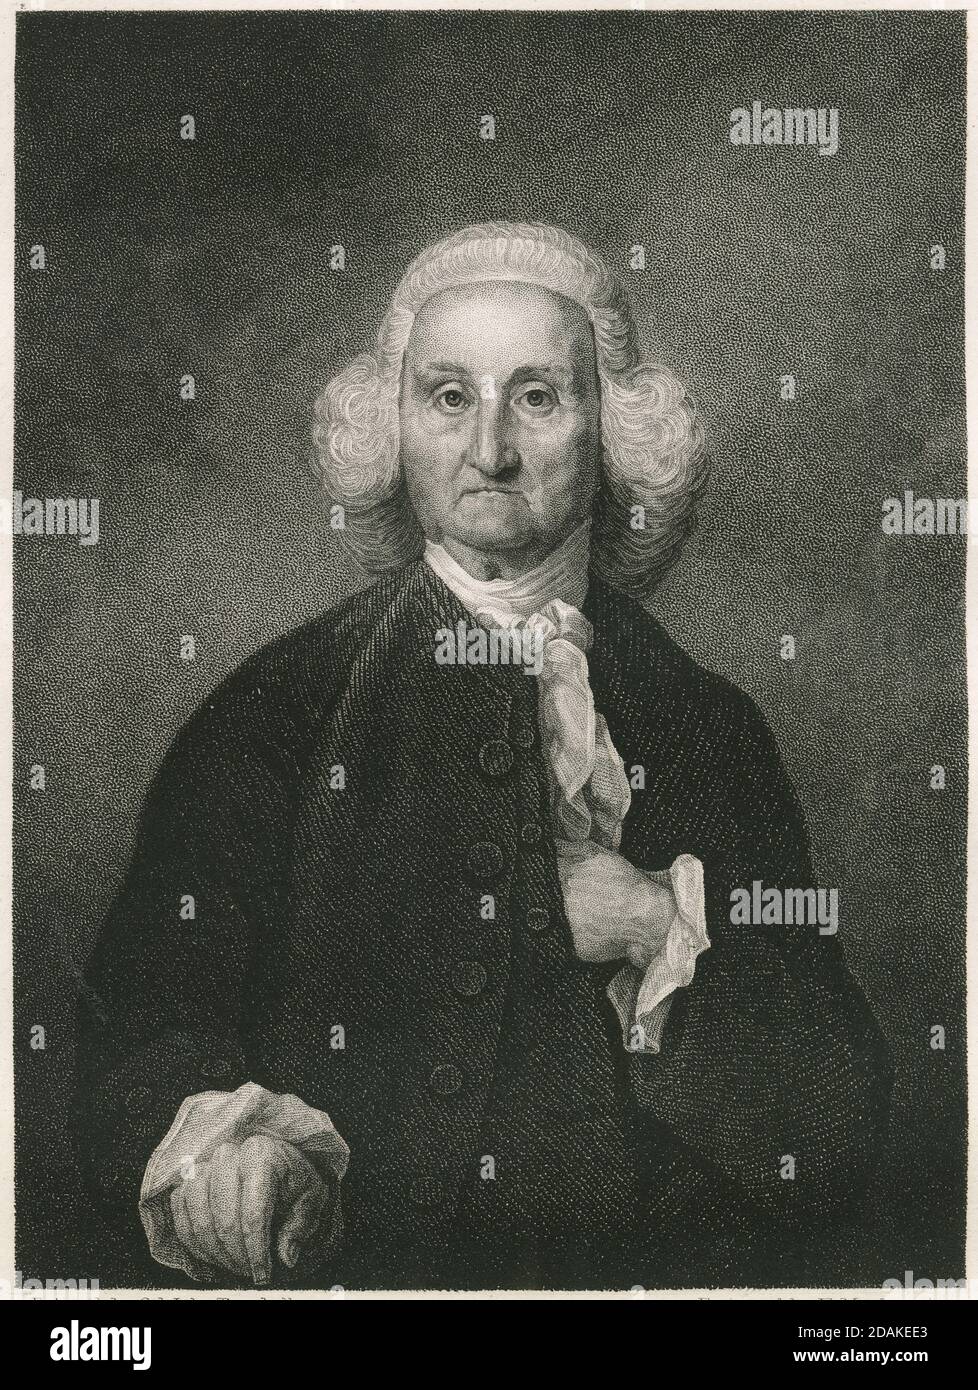 Antique c1860 engraving, Jonathan Trumbull. Jonathan Trumbull Sr. (1710-1785) was an American politician and statesman who served as Governor of Connecticut during the American Revolution. SOURCE: ORIGINAL ENGRAVING Stock Photo